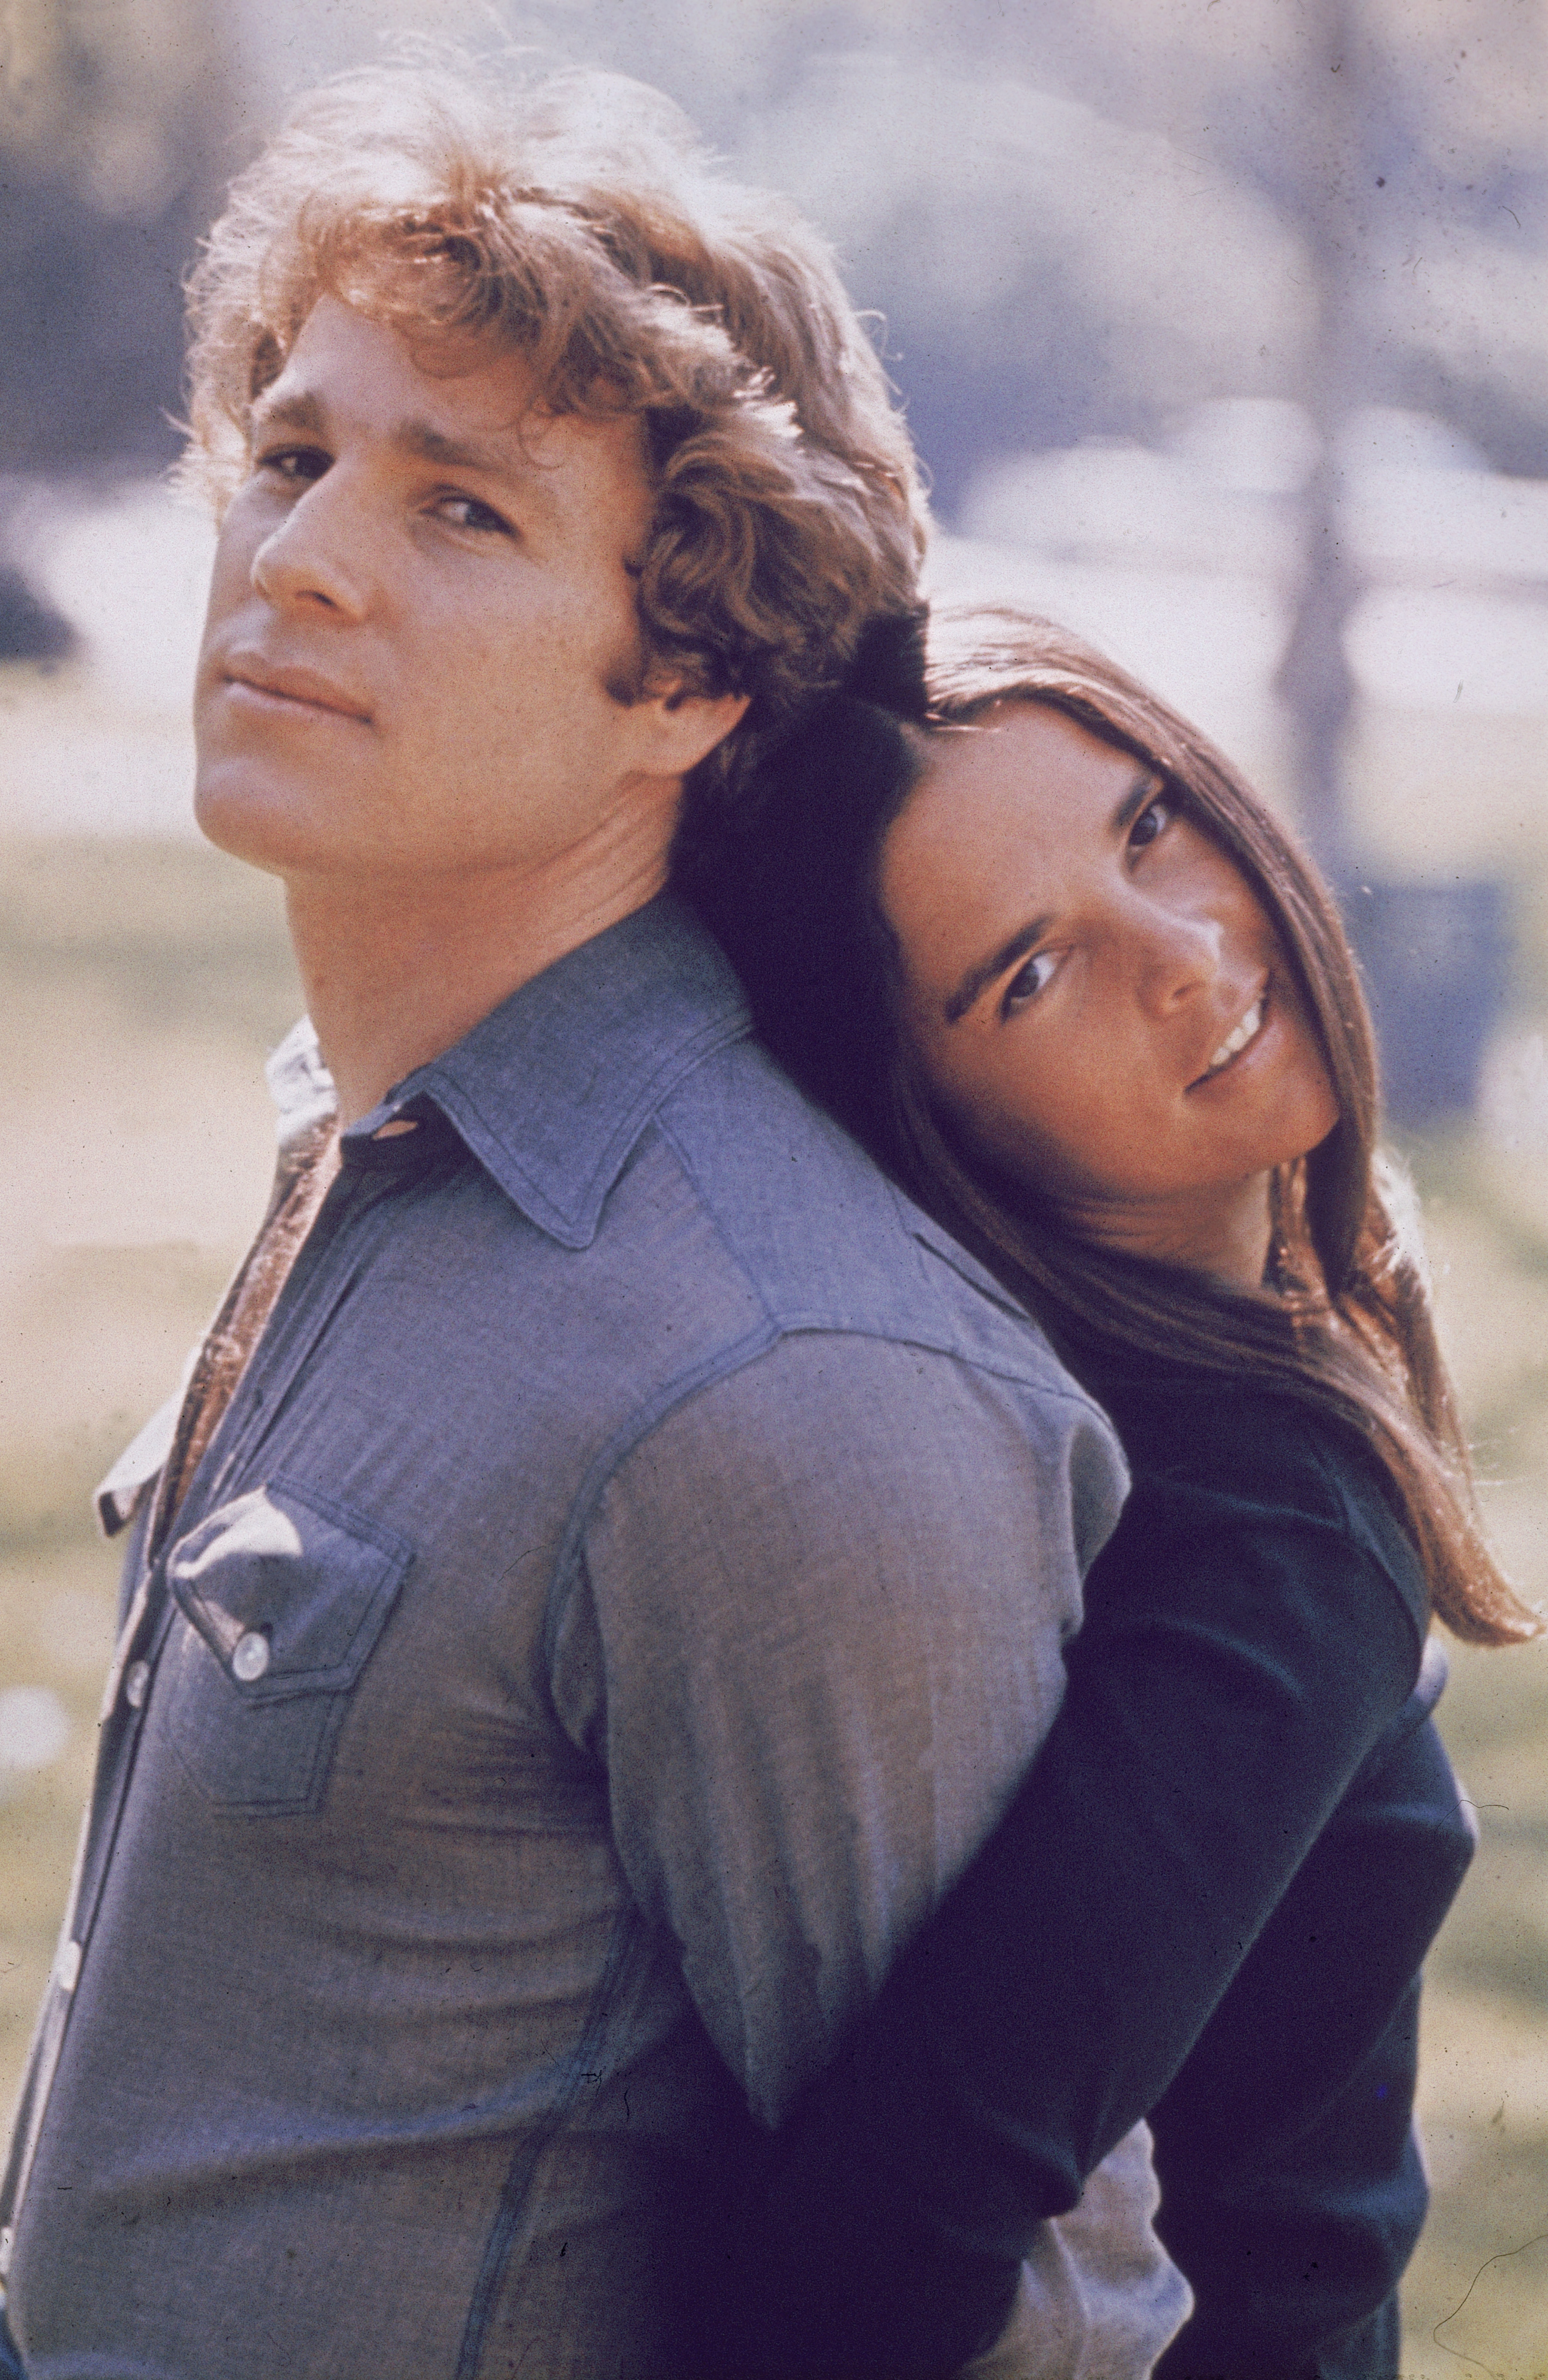 Ryan O'Neal and Ali MacGraw in a still from the movie "Love Story," 1970 | Source: Getty Images